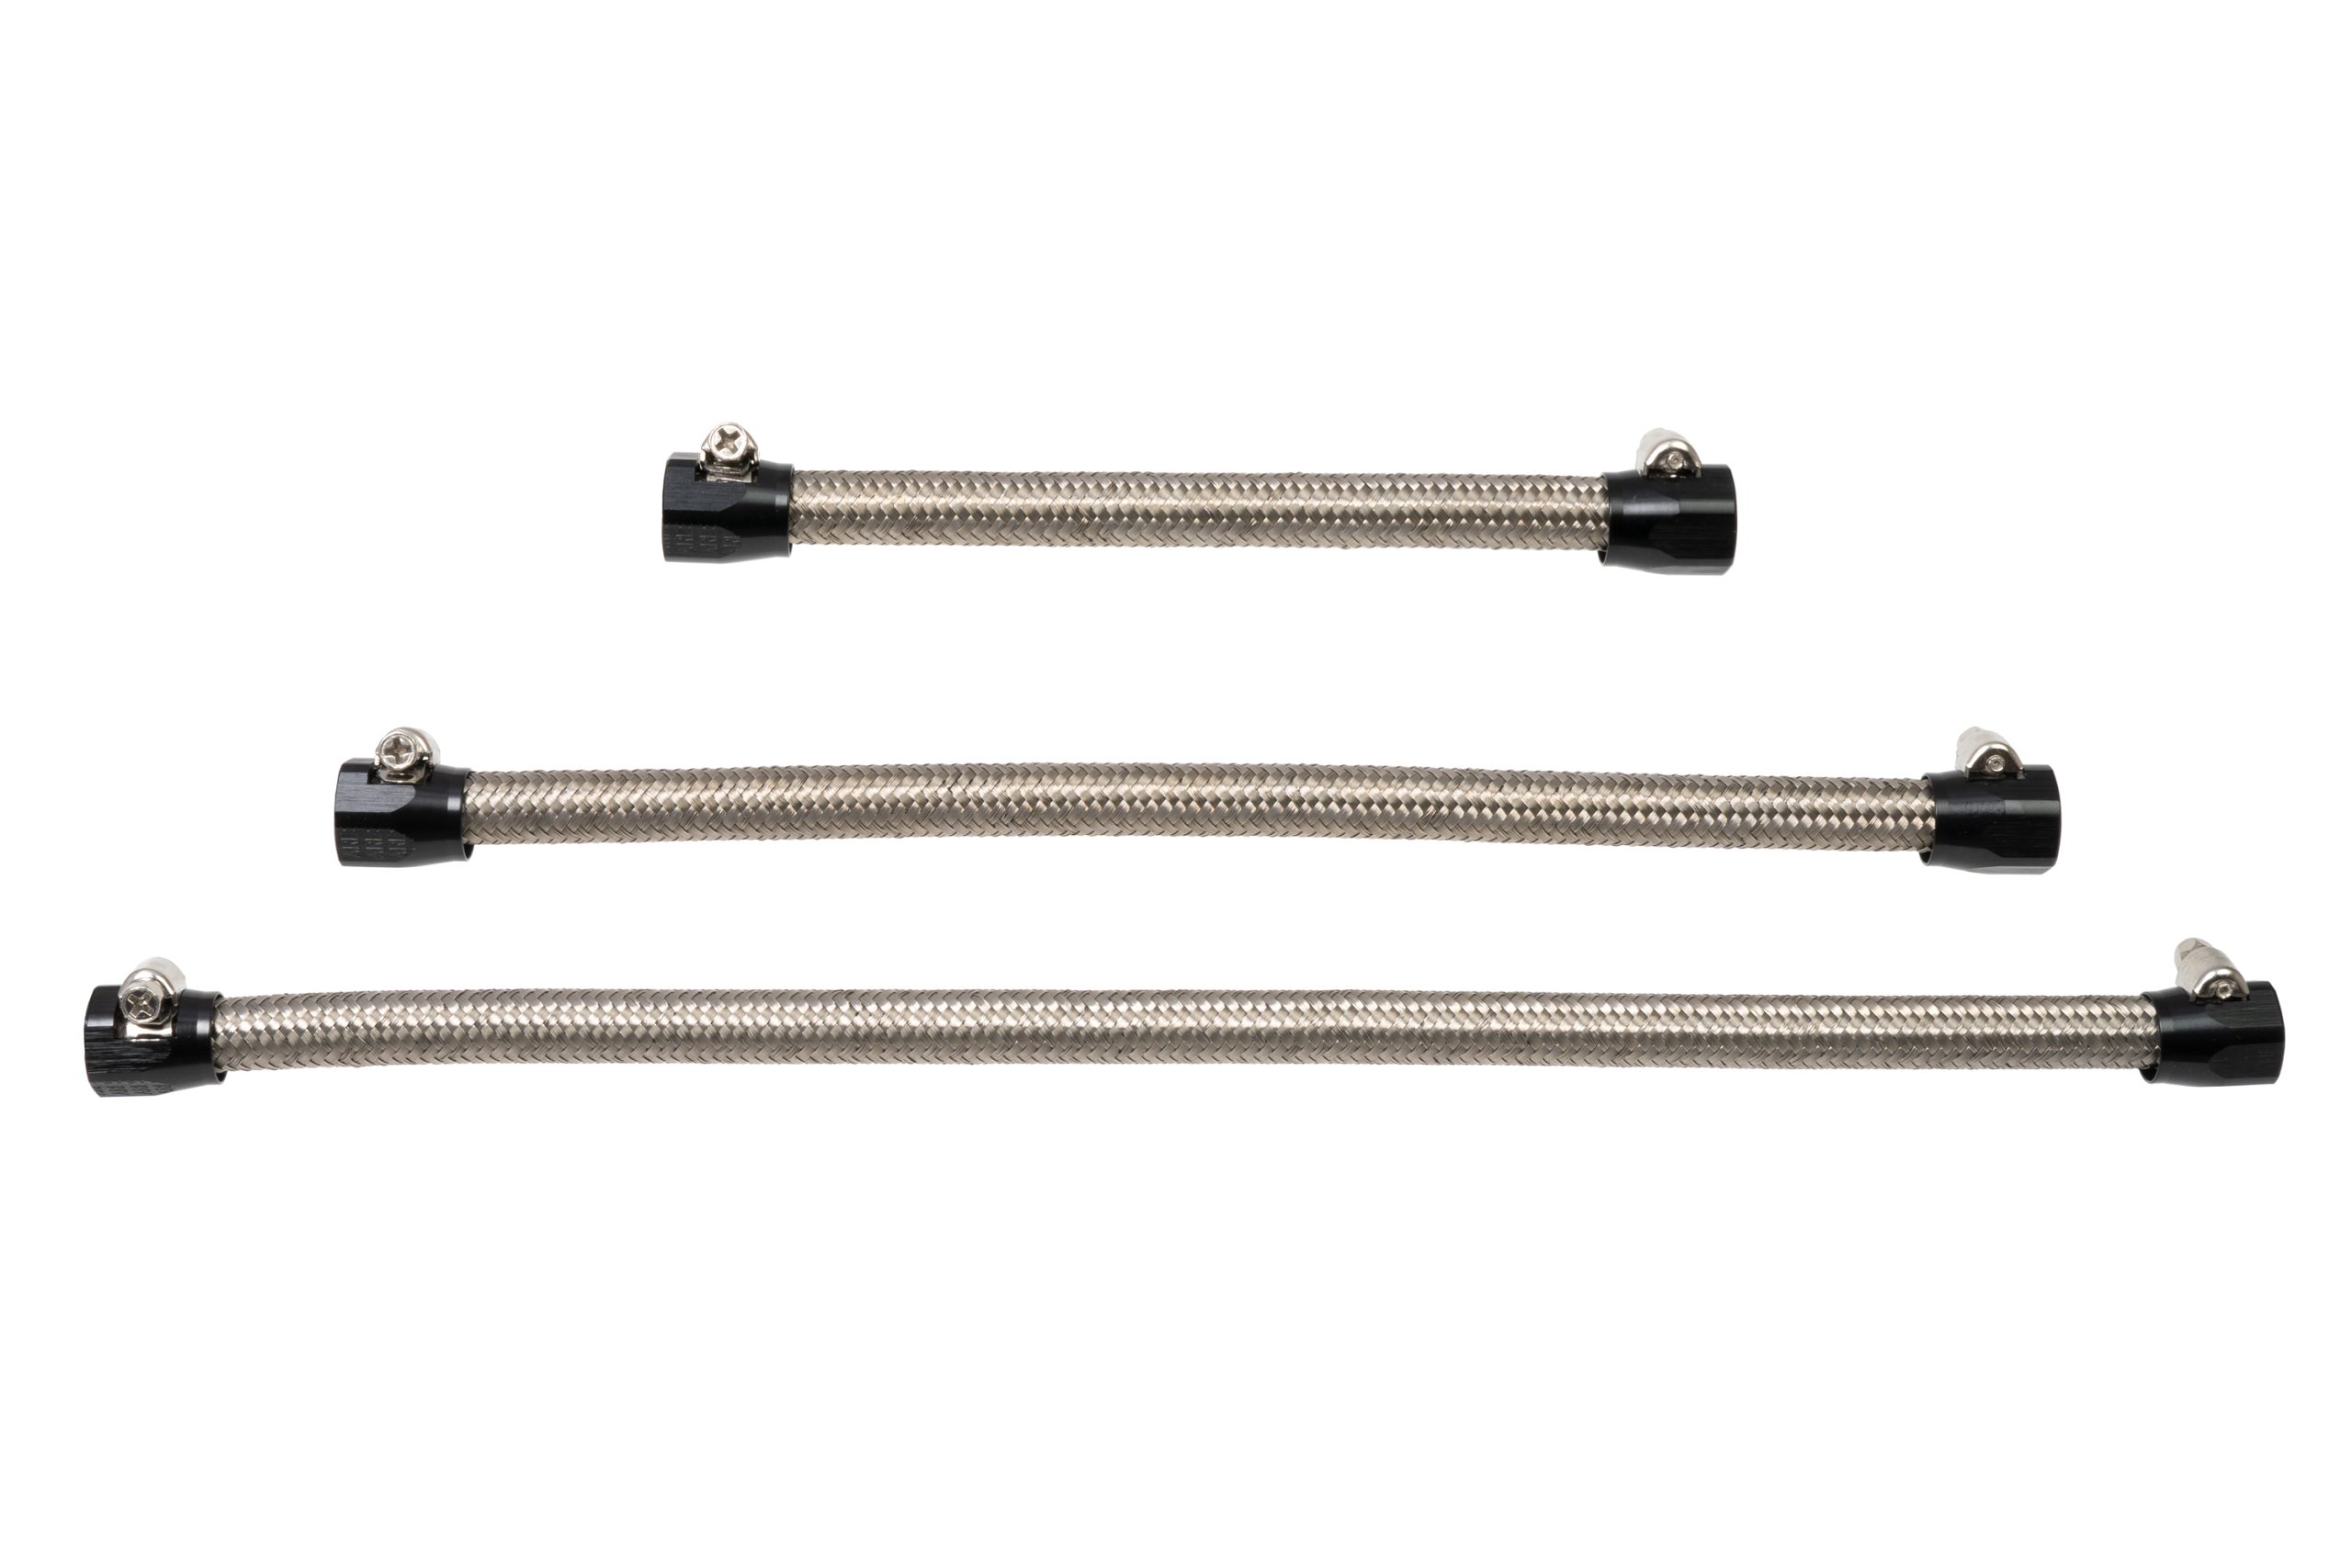 Stainless Steel Braided Fuel Line Kit